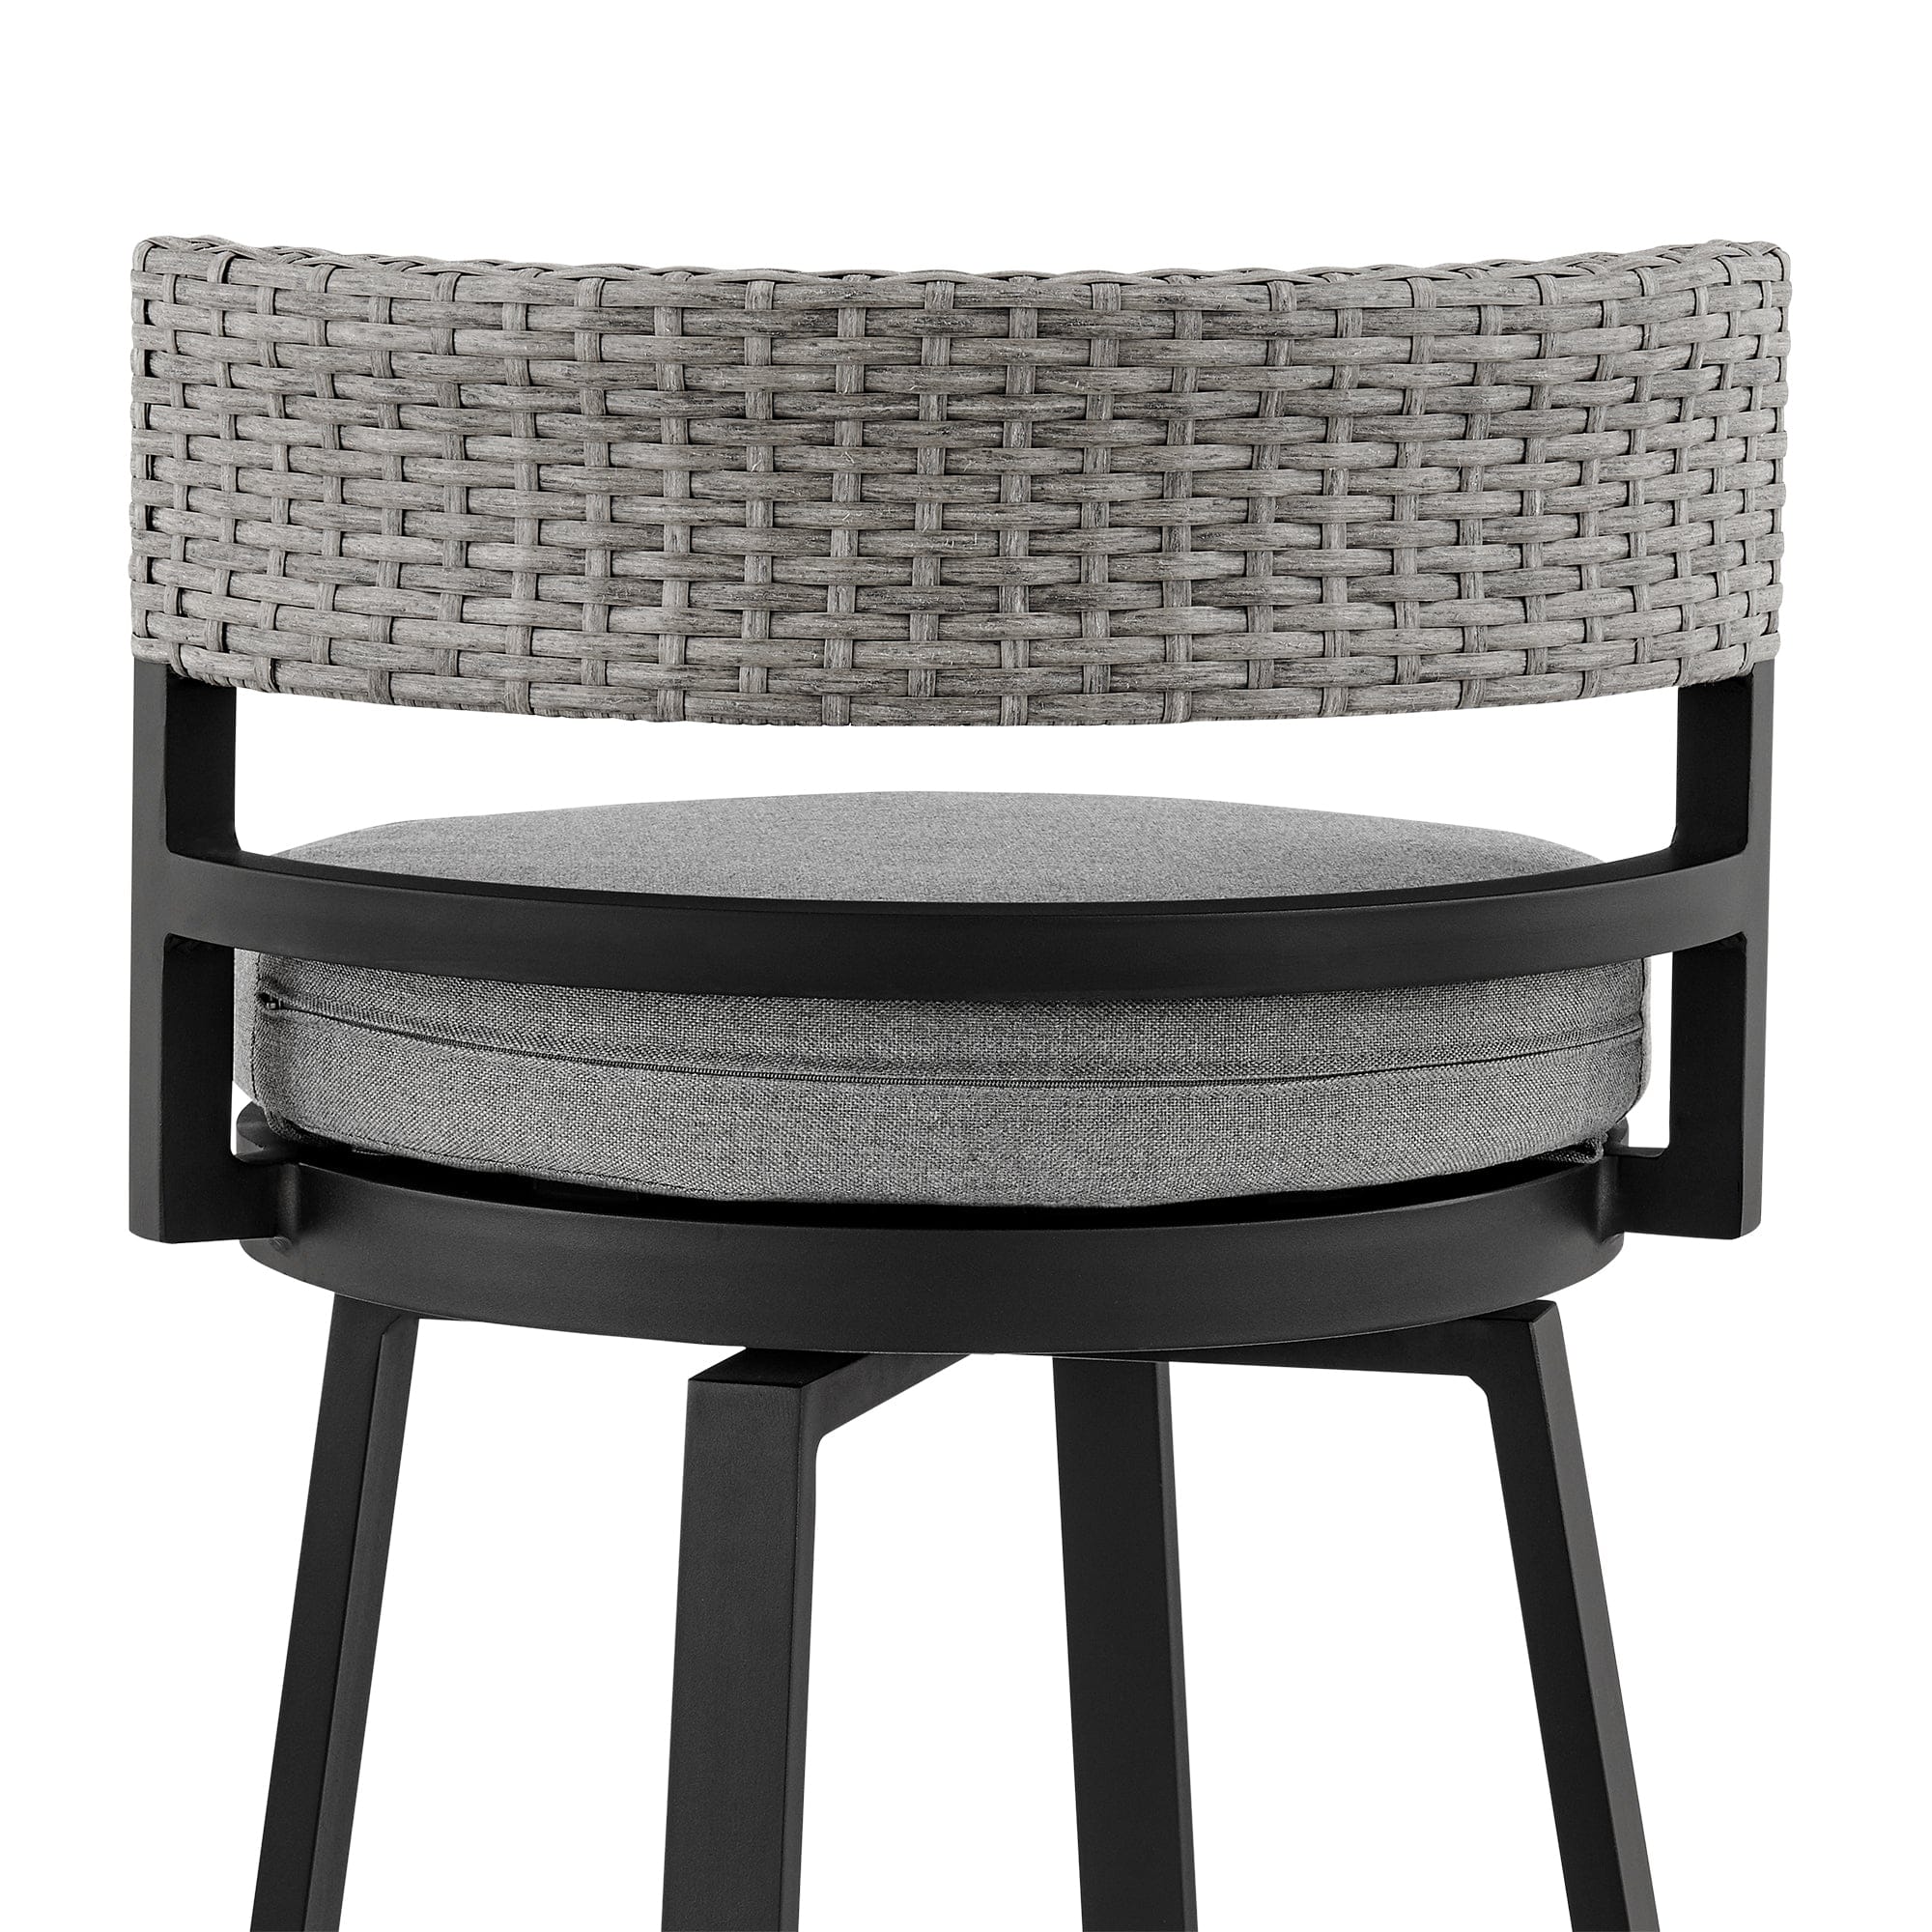 Armen Living Outdoor Bar Stool Armen Living | Encinitas Outdoor Patio Counter Height Swivel Bar Stool in Aluminum and Wicker with Grey Cushions | LCECBAGR26